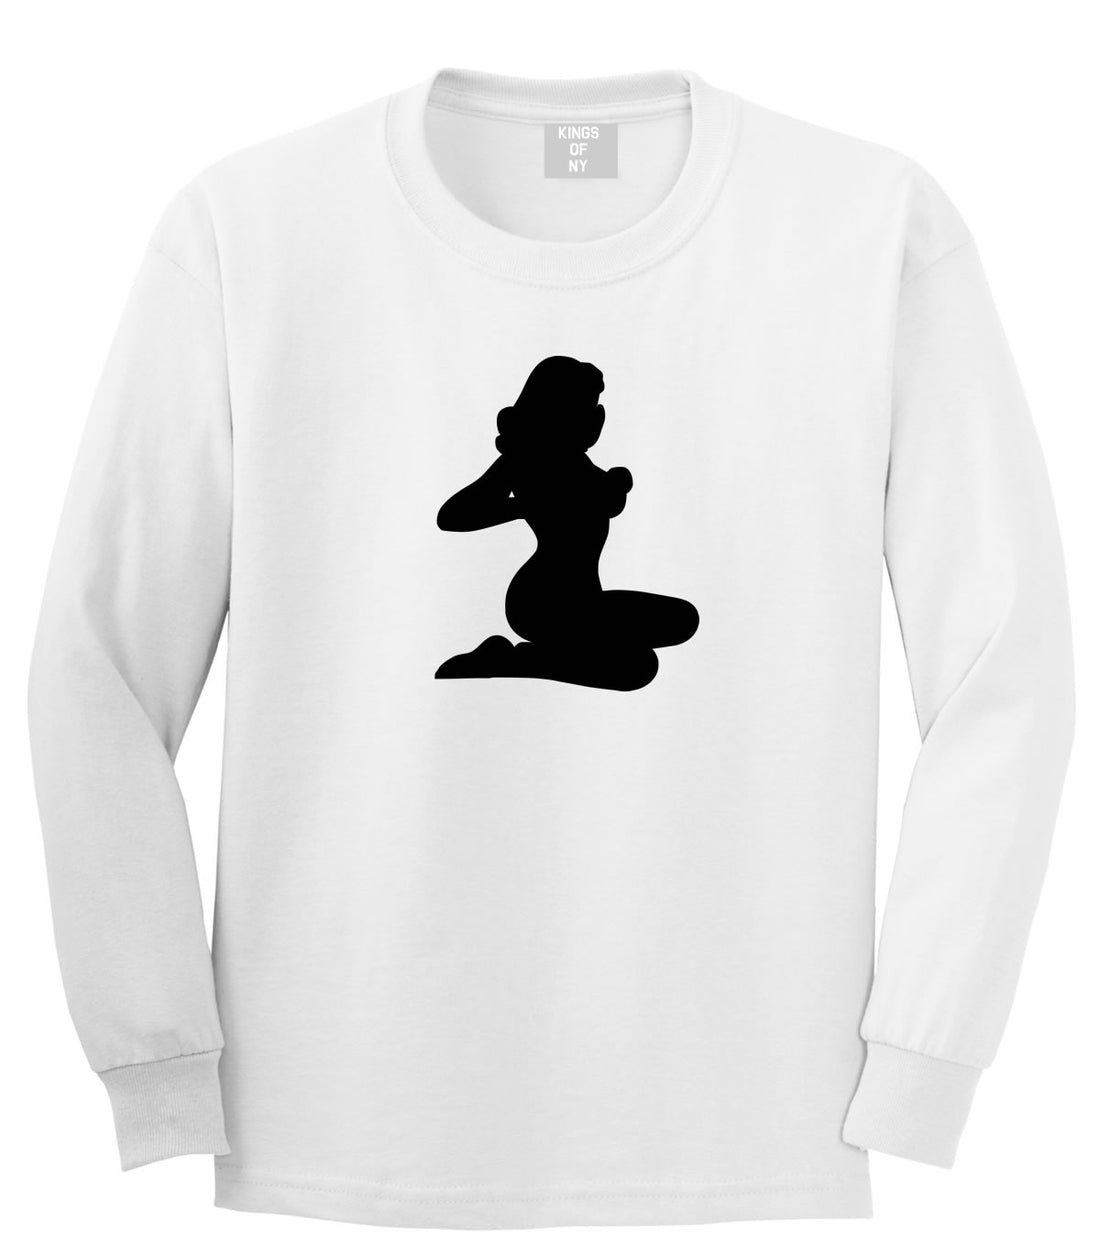 Stripper Girl Long Sleeve T-Shirt by Kings Of NY